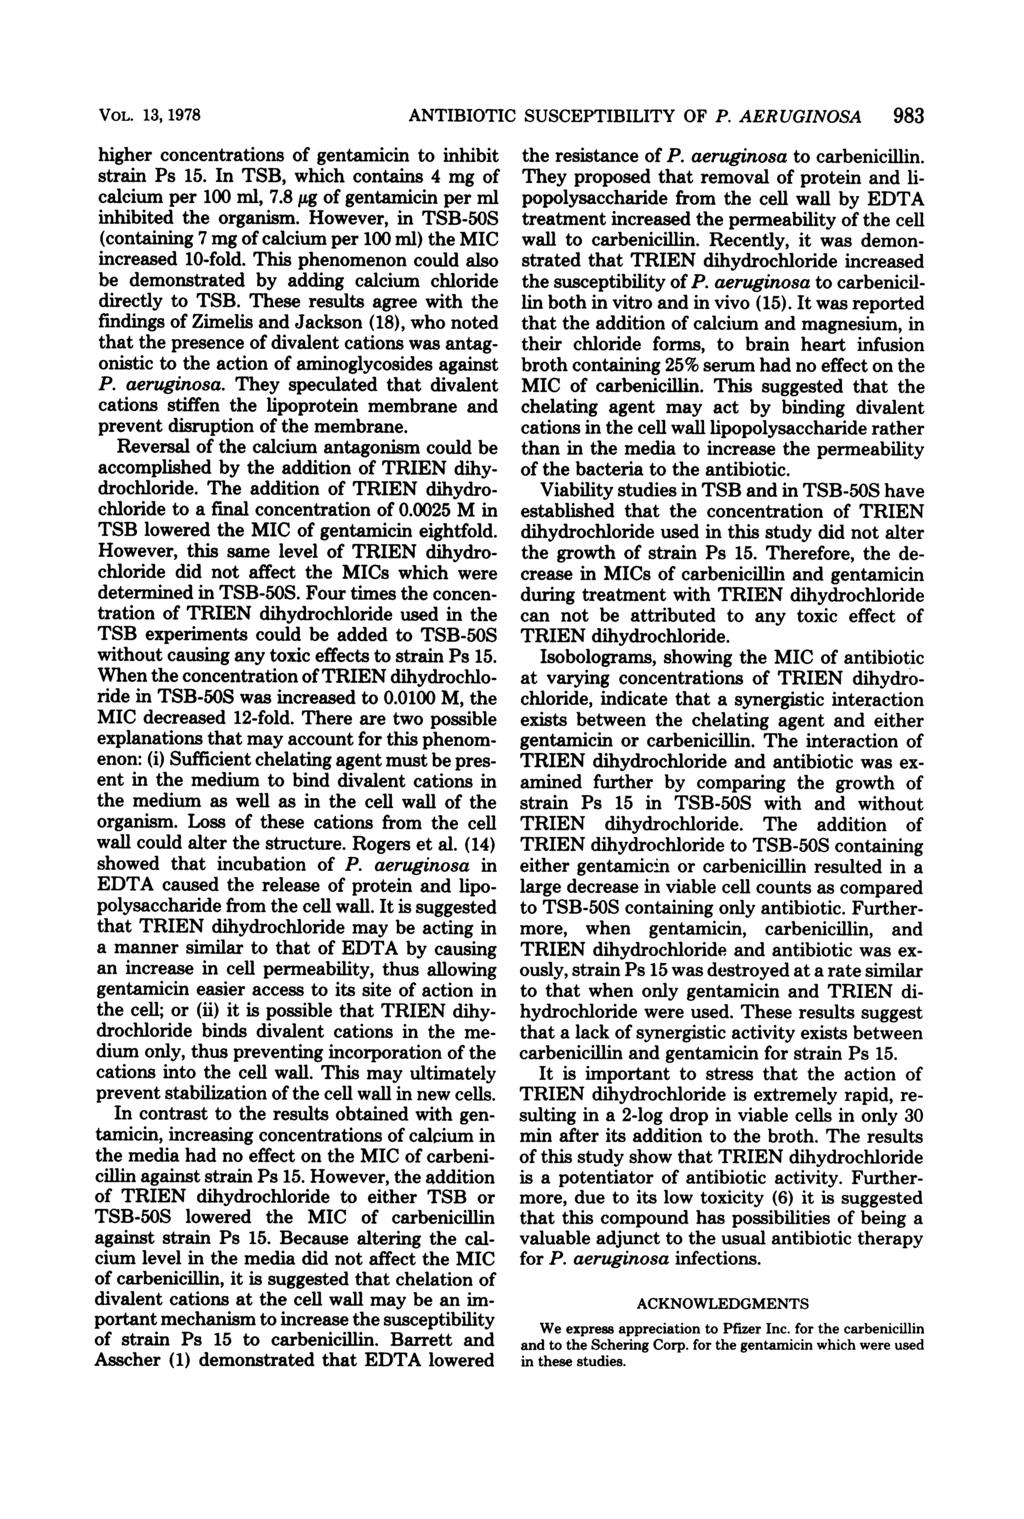 VOL. 13, 1978 higher concentrations of gentamicin to inhibit strain Ps 15. In TSB, which contains 4 mg of calcium per 100 ml, 7.8,ug of gentamicin per ml inhibited the organism.